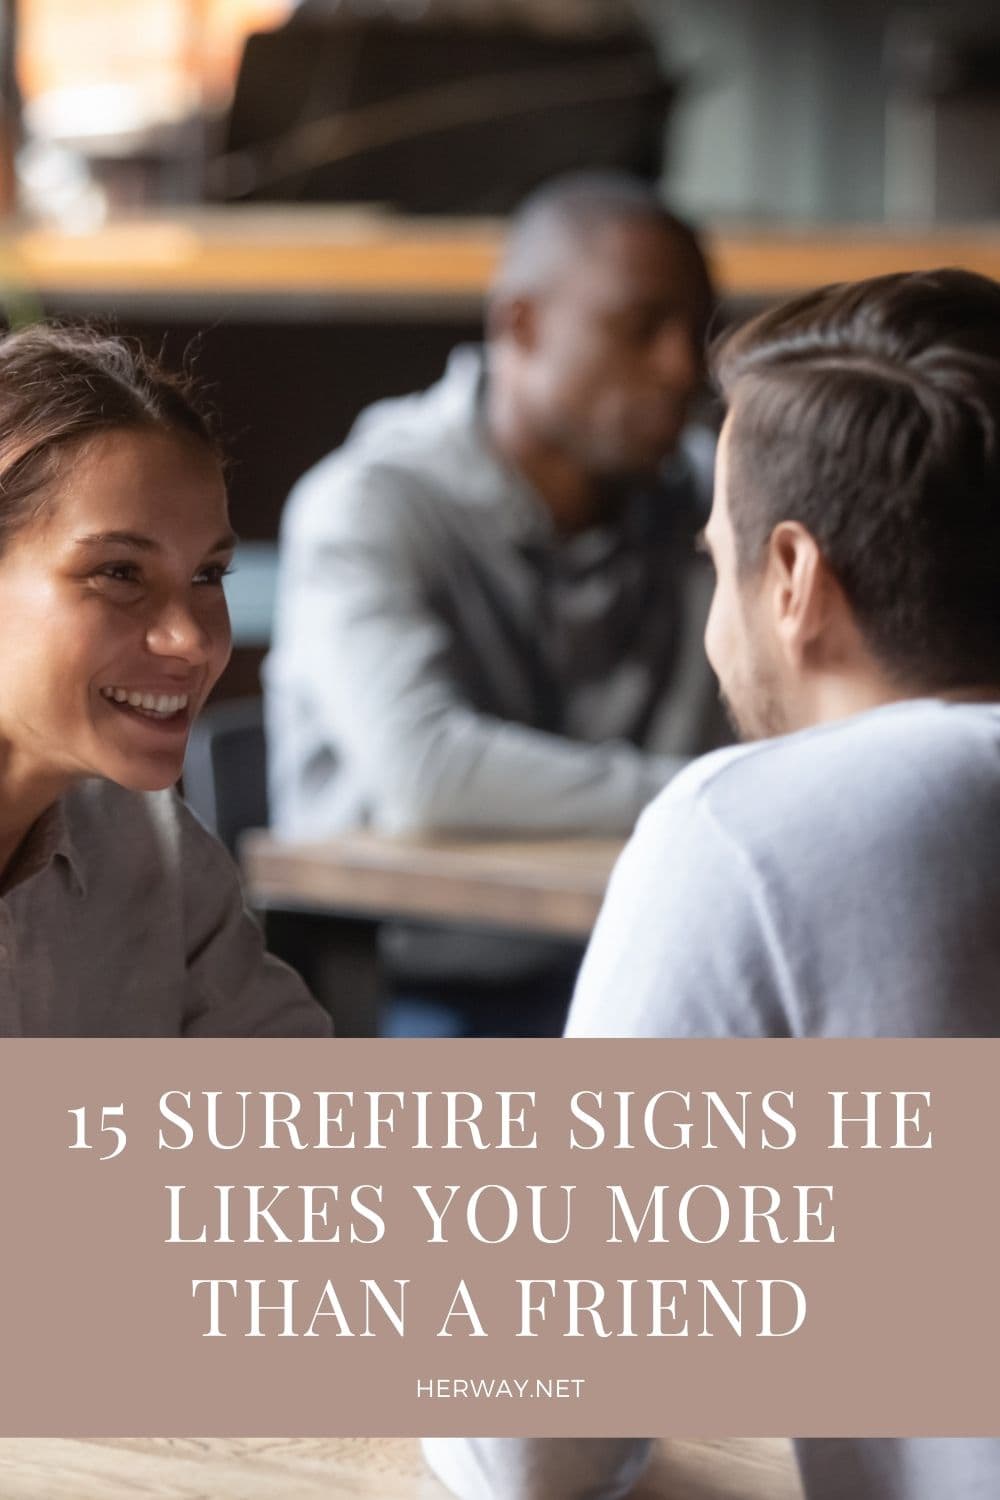 15 Surefire Signs He Likes You More Than A Friend